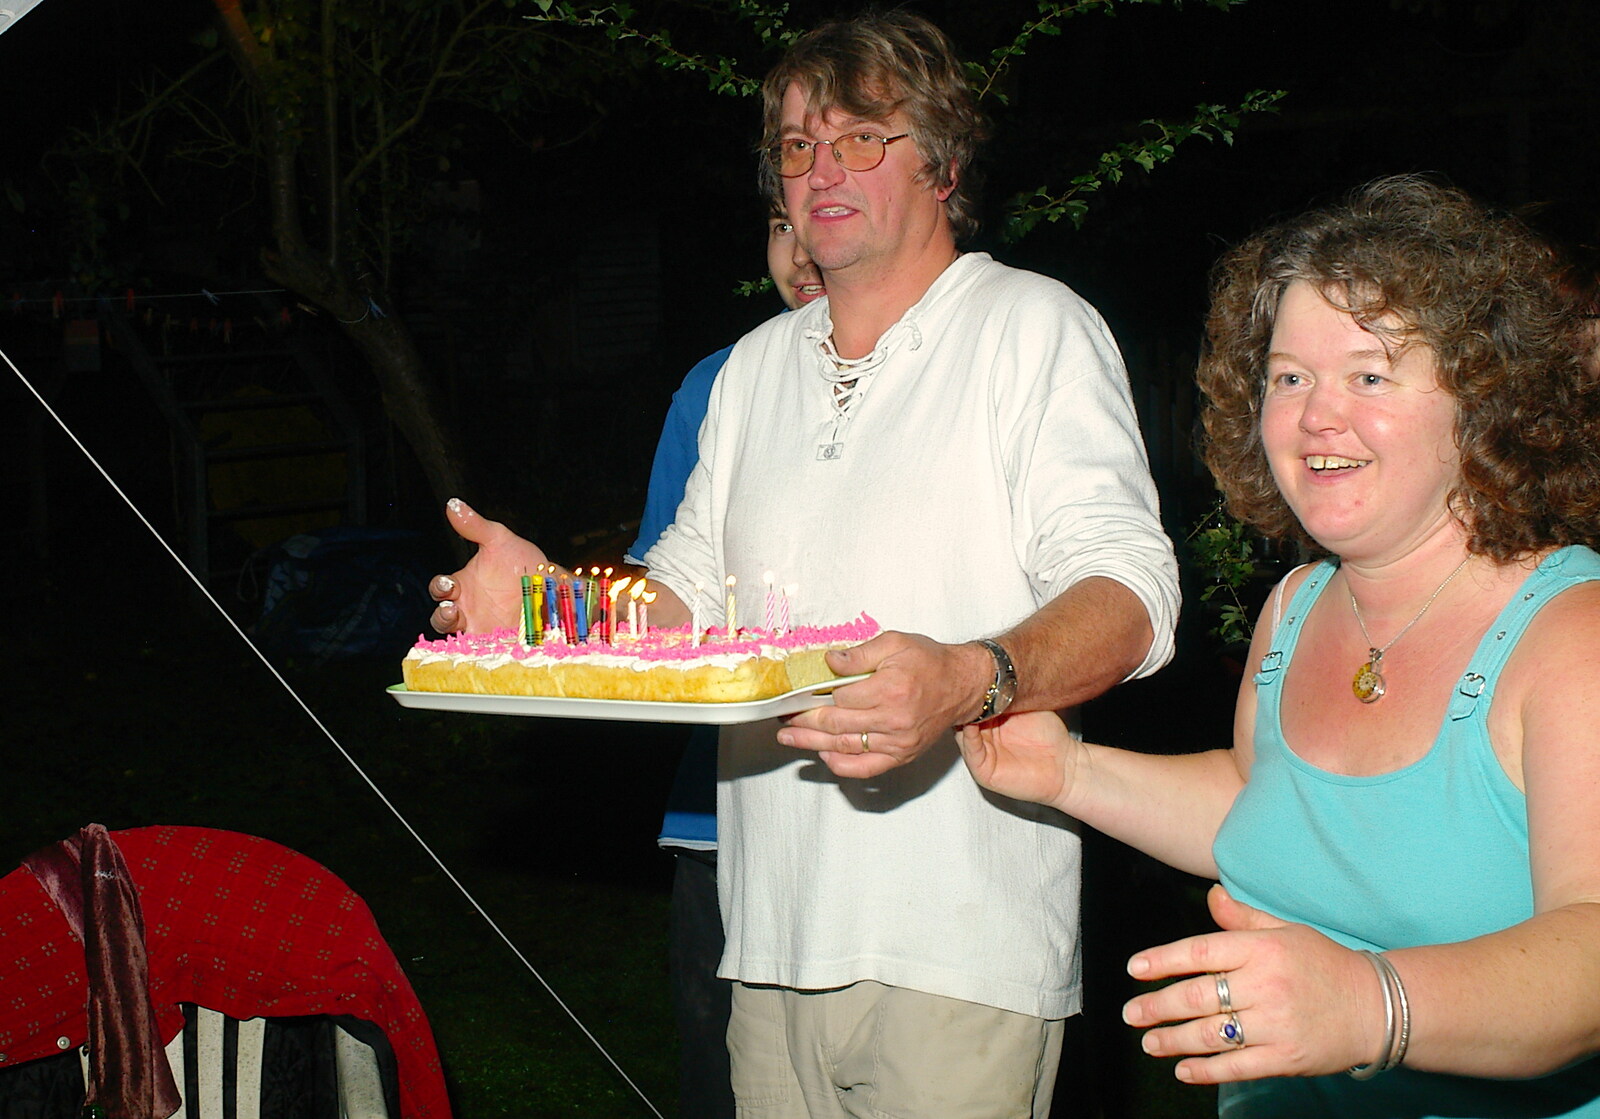 Jo and Steph's Party, Burston, Norfolk - 30th September 2005: Steph's birthday cake is bought in by Martin